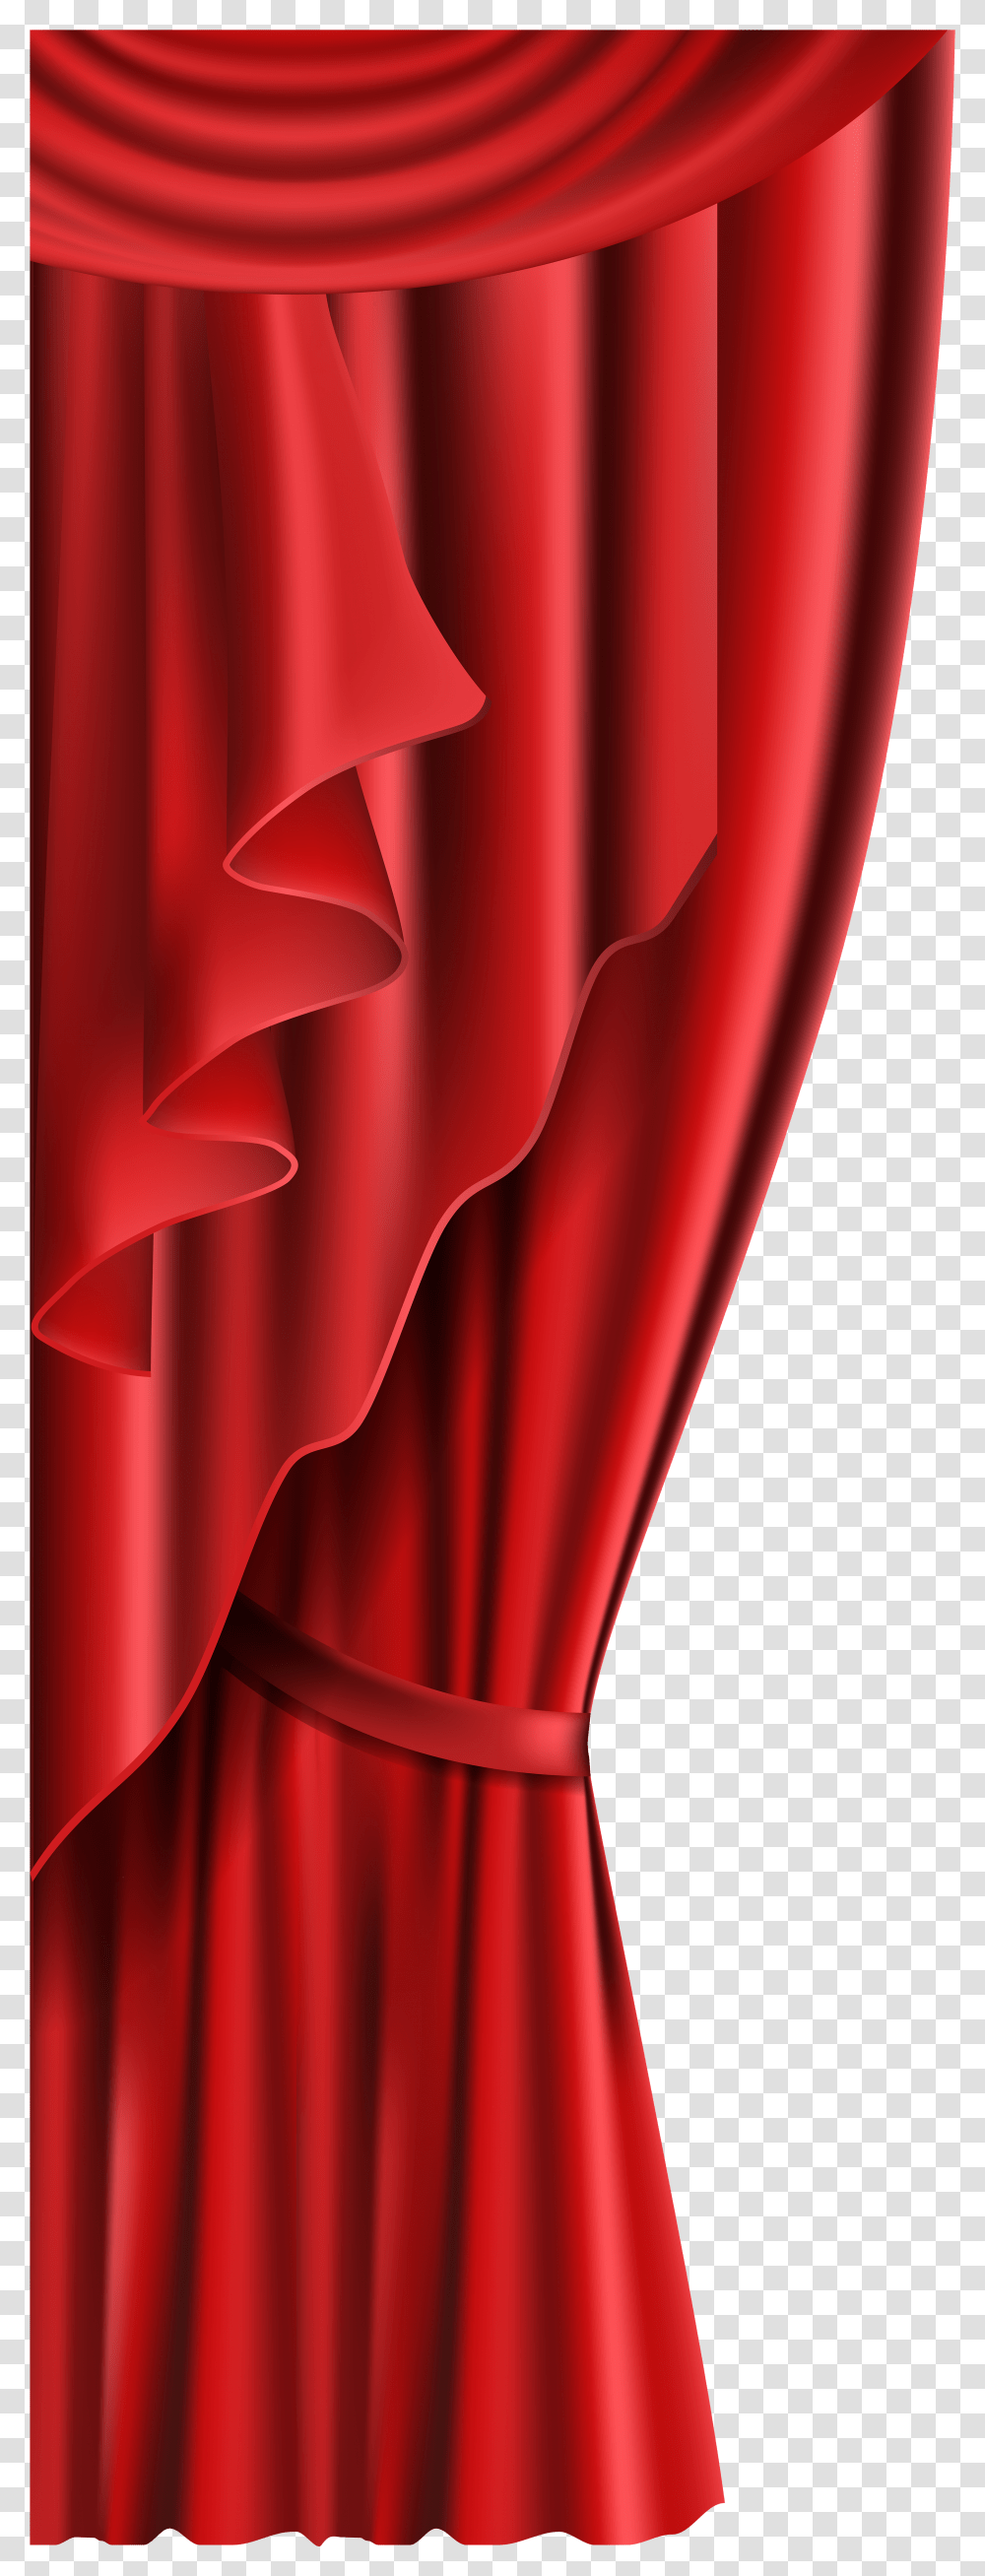 Red Curtain Hd Transparent Png